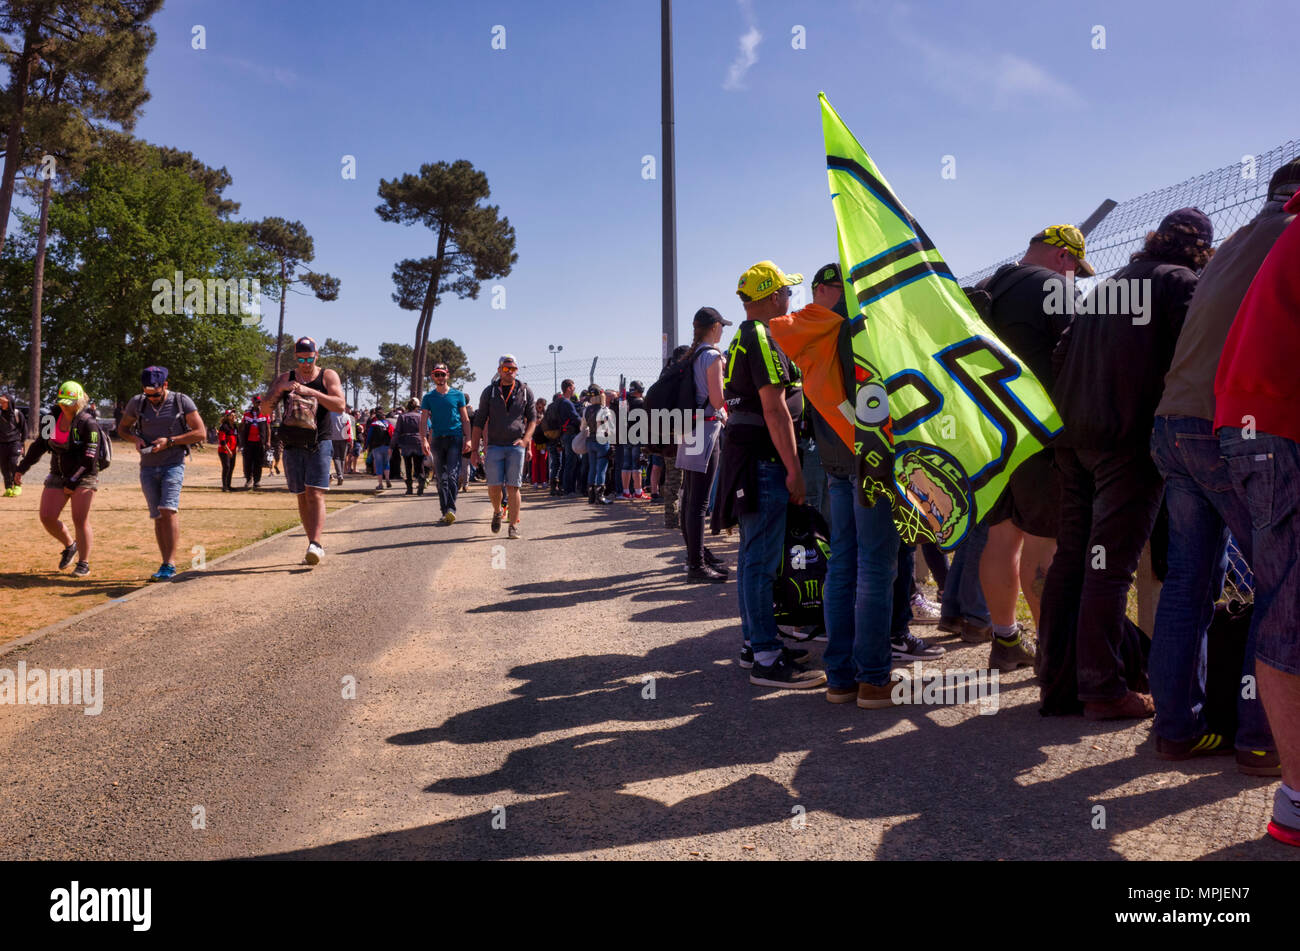 19-20th May 2018. Le Mans, France.  Behind the scenes at the MotoGP.  Spectators line the perimeter fence of the race circuit to watch the MotoGP practice session.  Meanwhile, other fans walk along the dirt road behind in search of refreshments or alternative viewing locations.  One of the spectating fans holds a number 46 flag, demonstrating his support of Valentino Rossi. Stock Photo